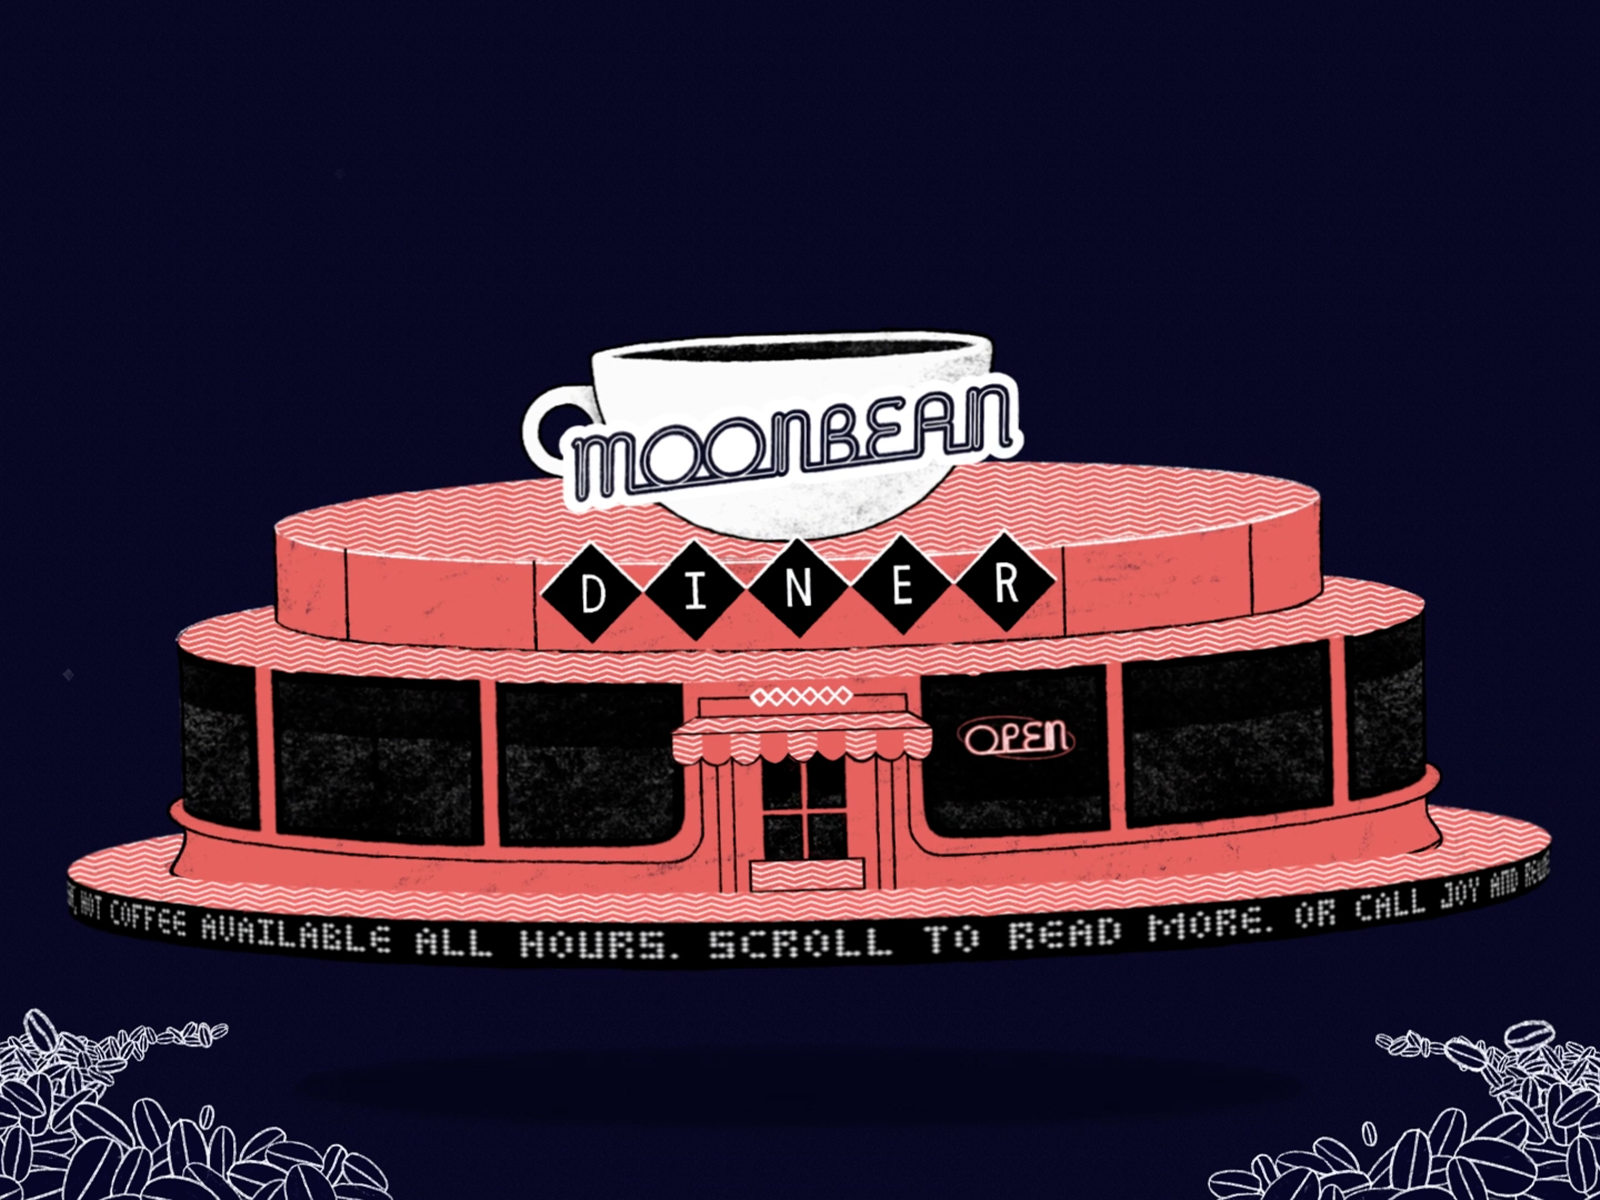 Moonbean Diner Introduction Video